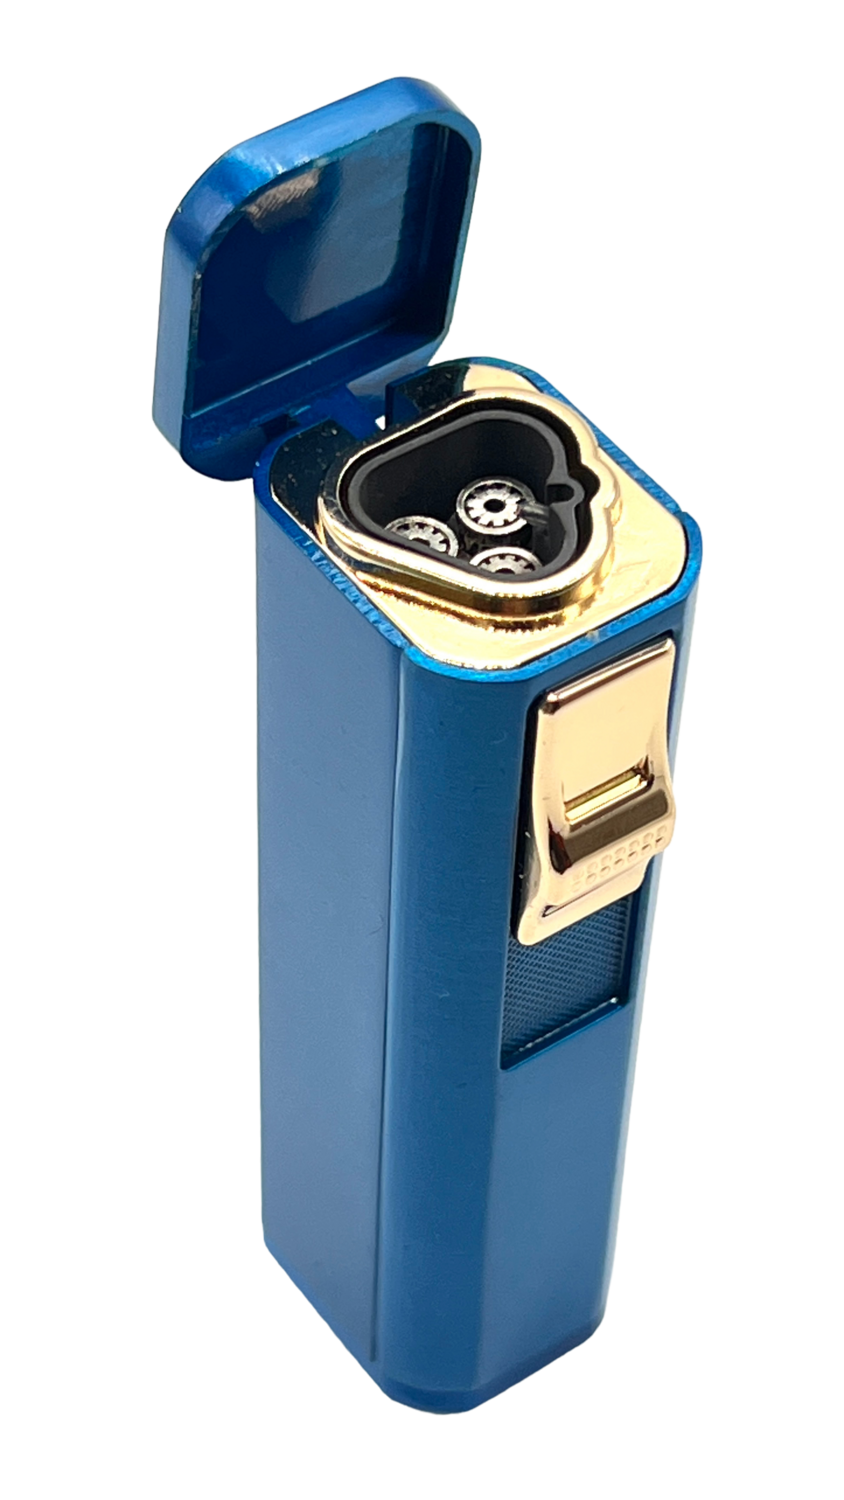 Triple Jet Burner Torch Lighter with a fold-out Punch Cutter